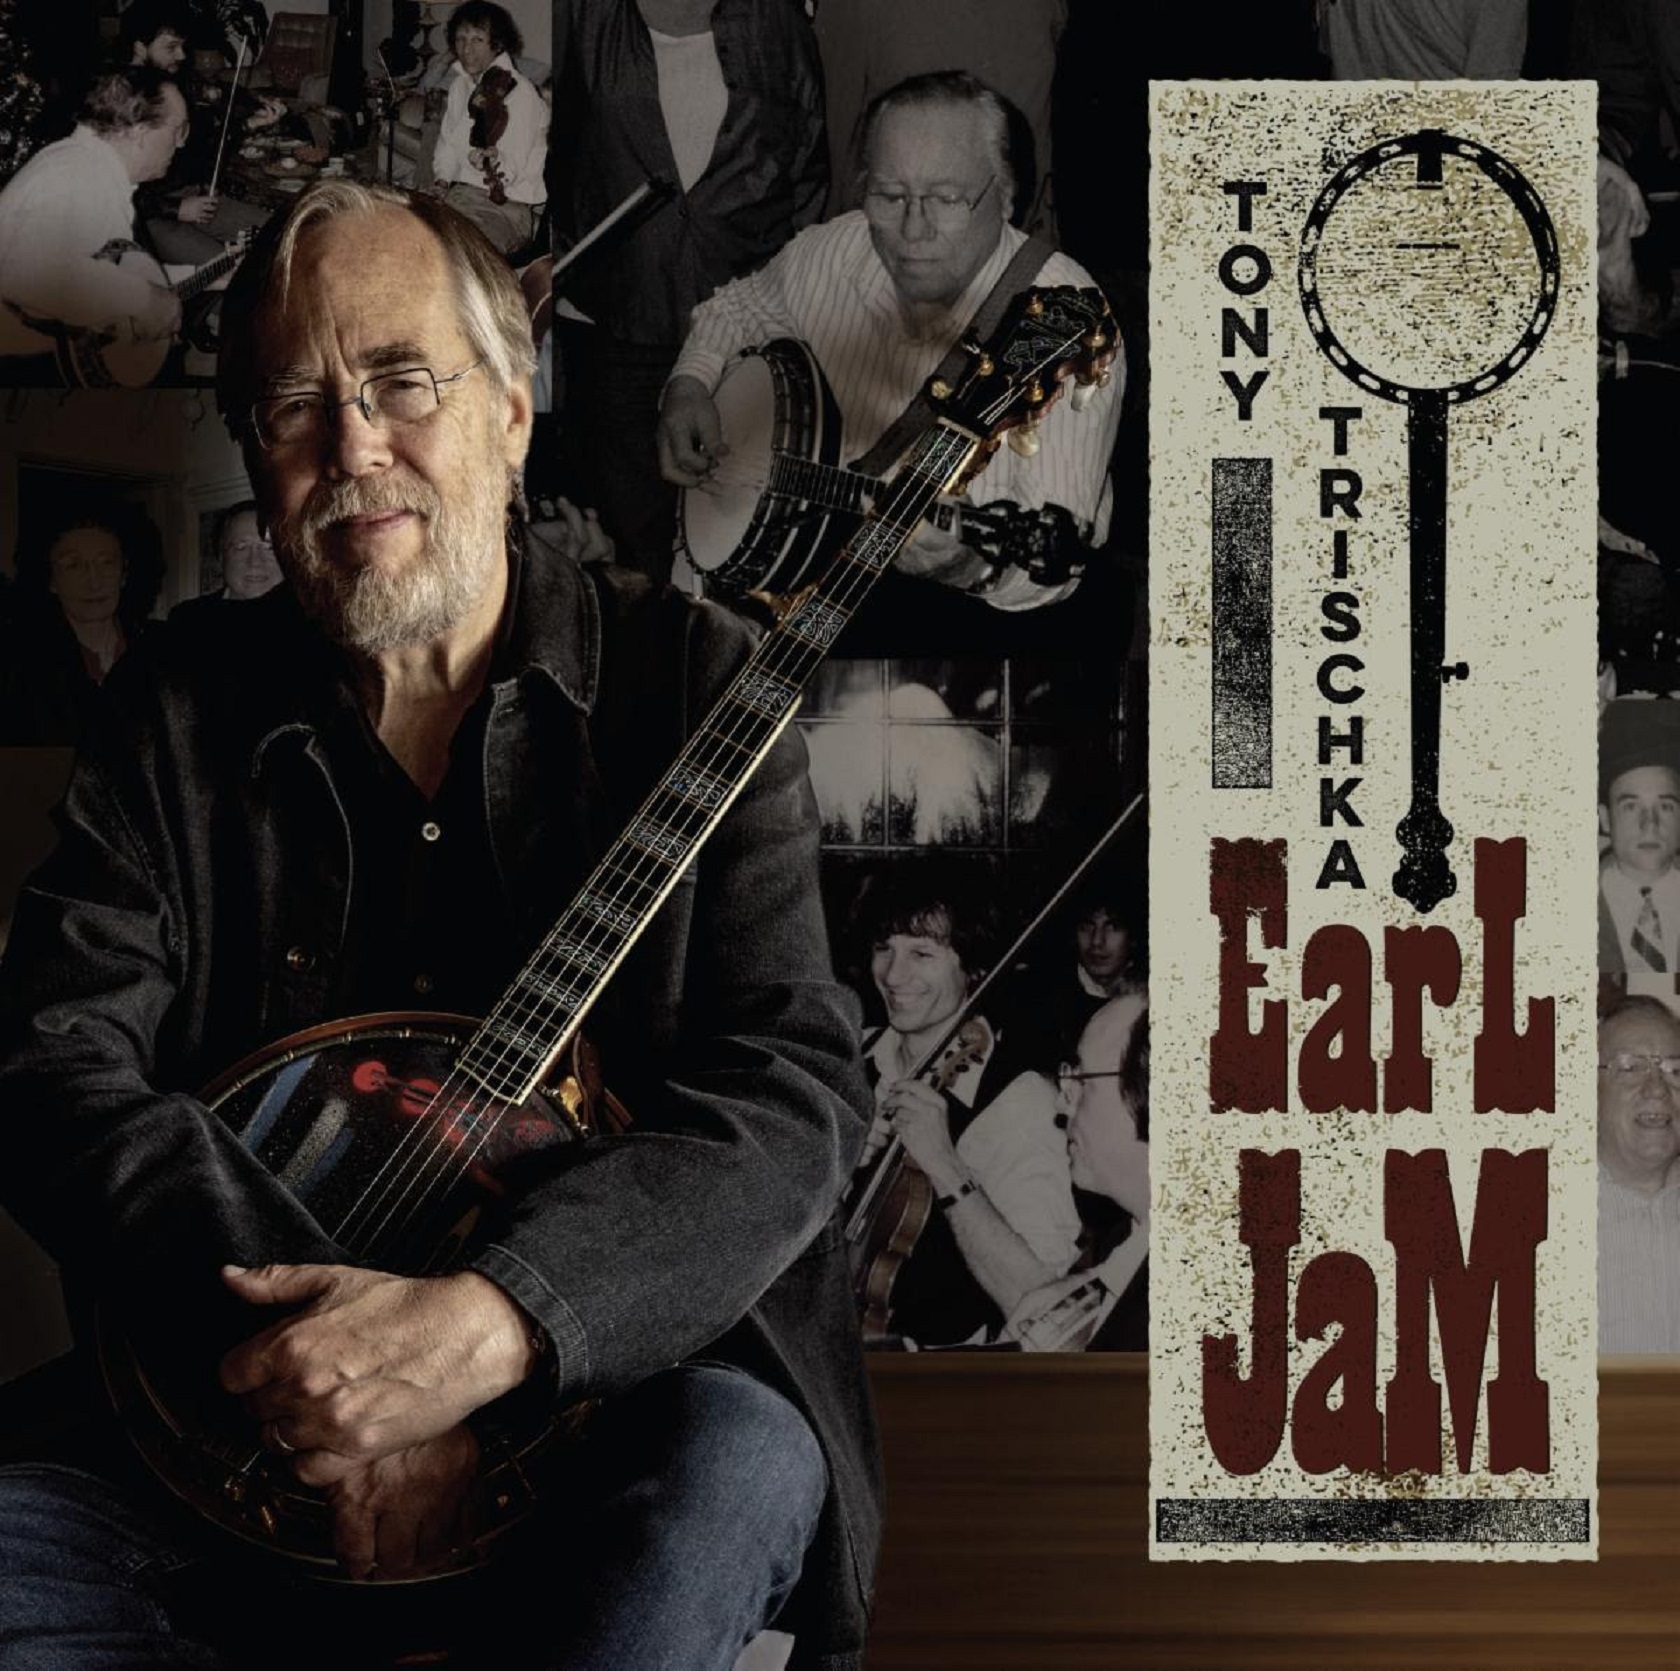 Tony Trischka Releases Sweeping, Star-Studded Collection For His Hero With Earl Jam: A Tribute To Earl Scruggs